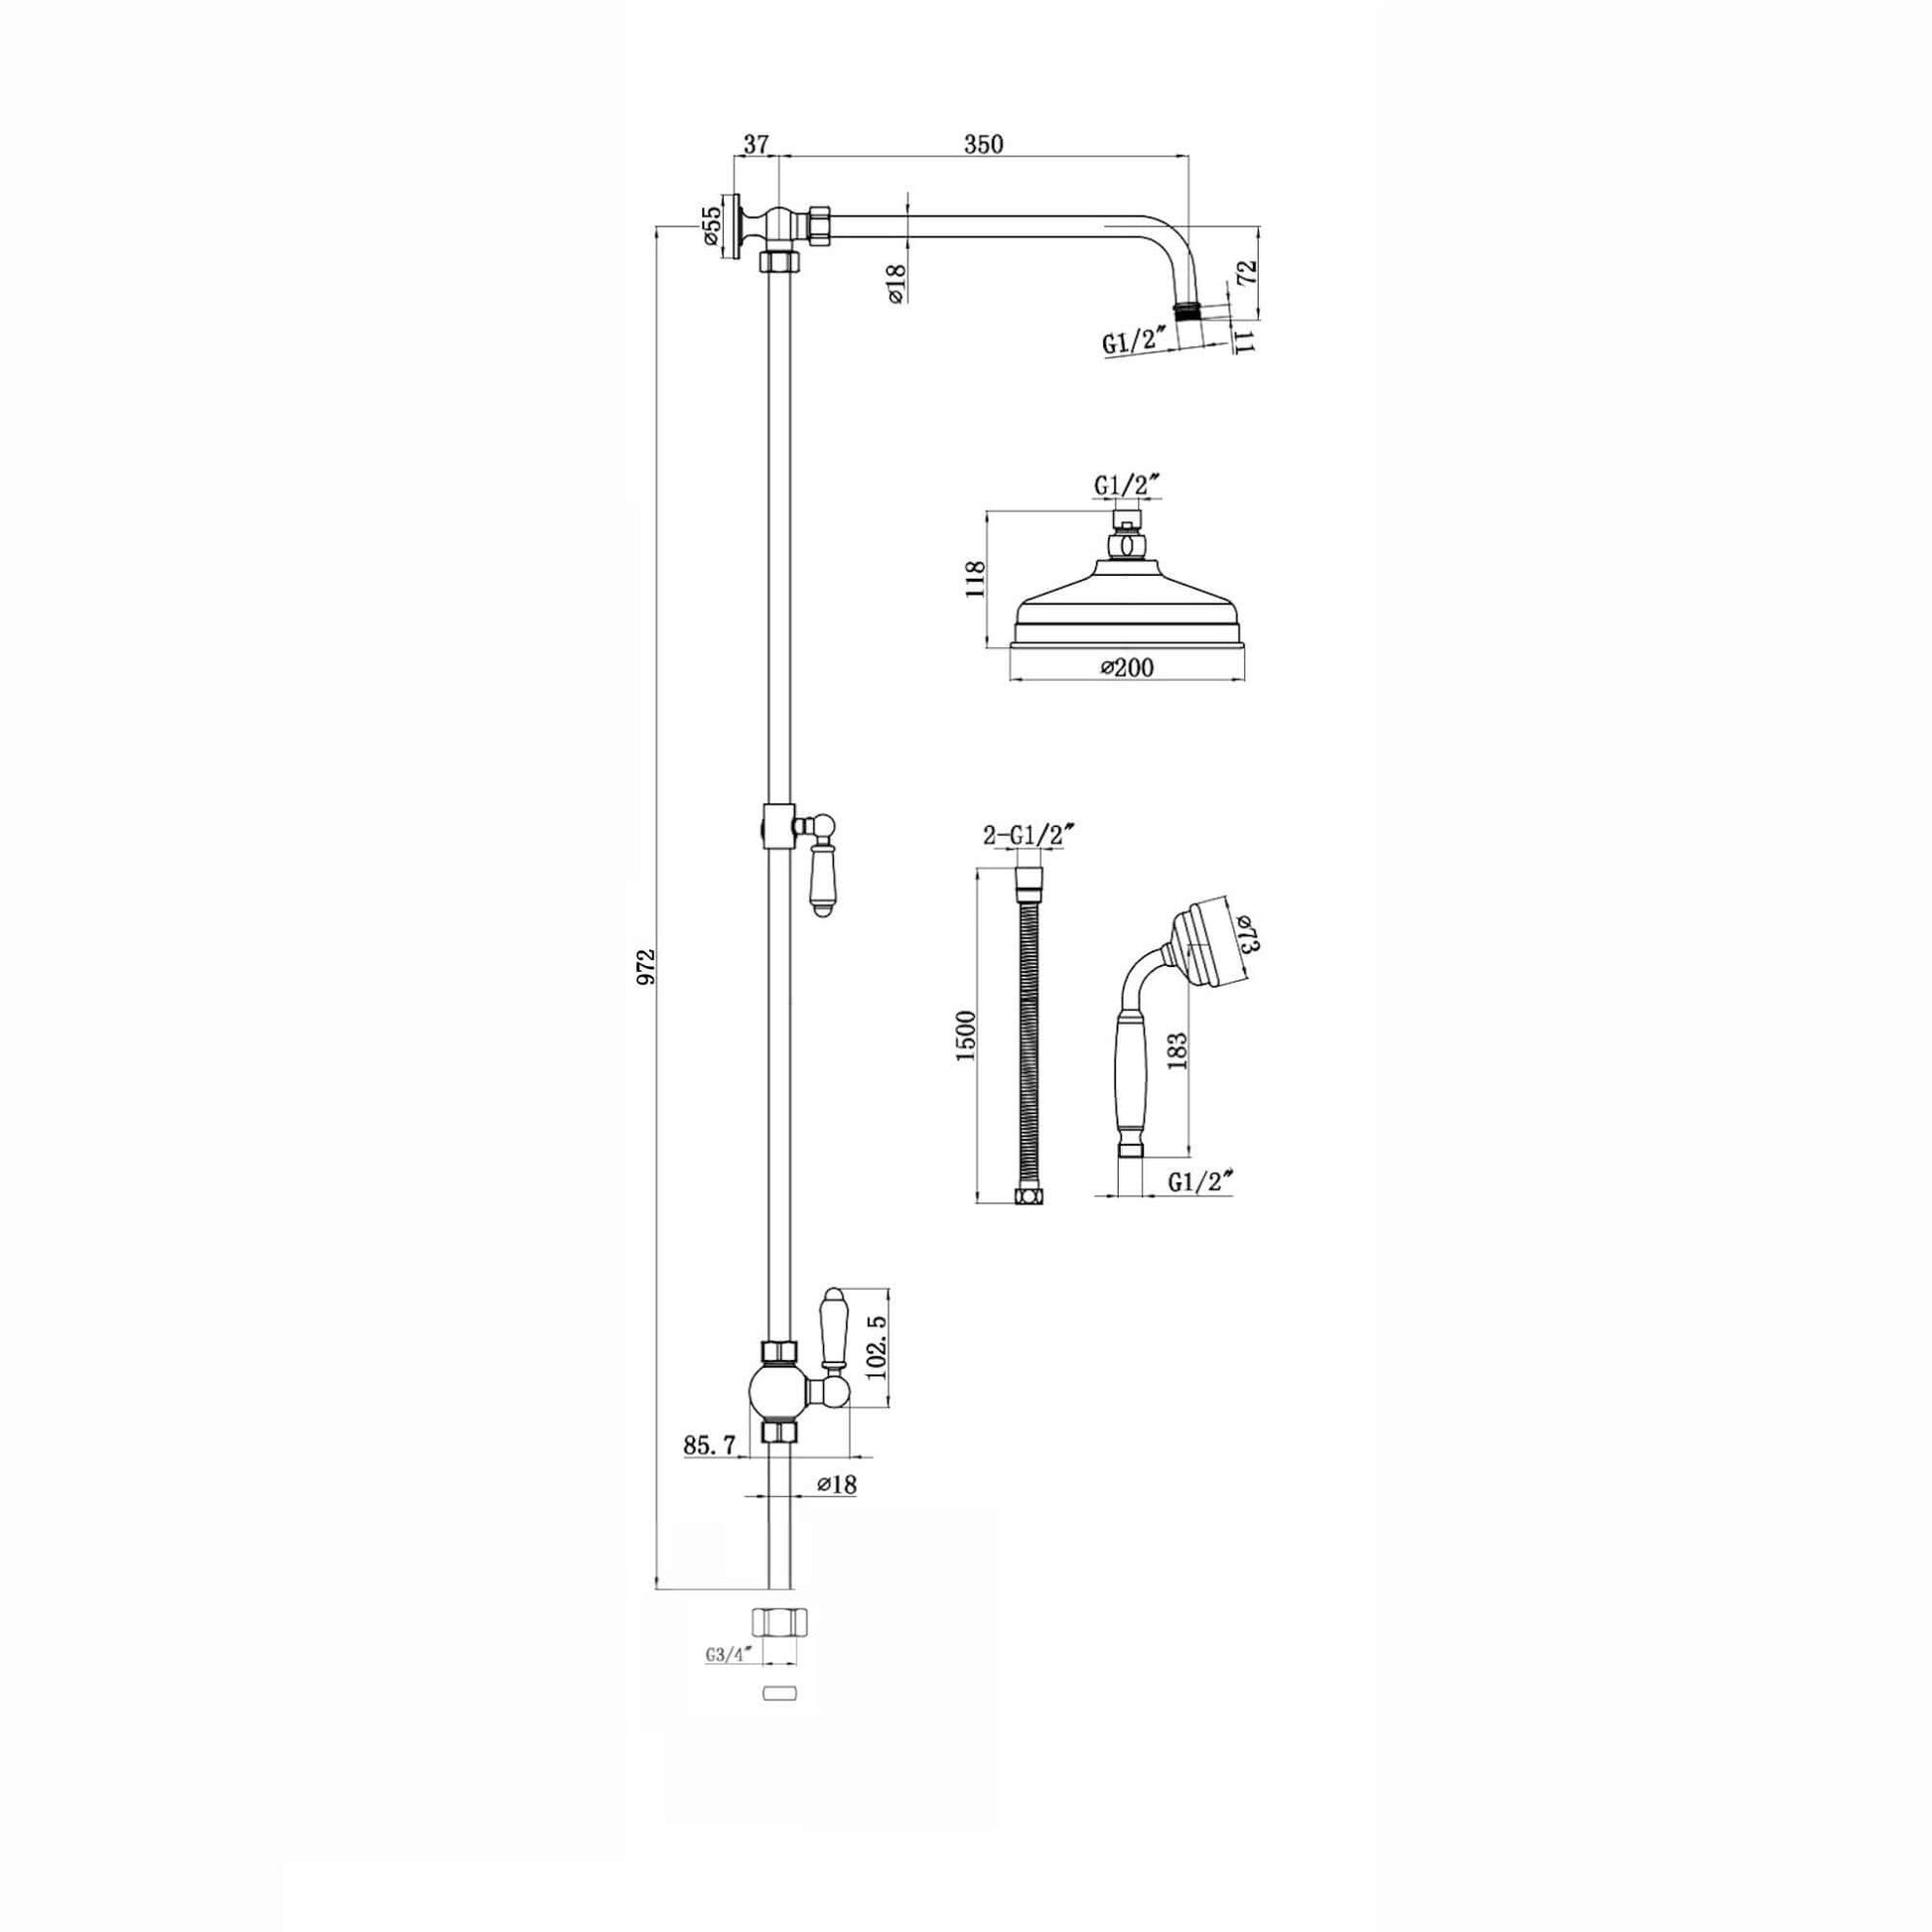 Downton traditional shower riser rail kit 2 outlet watercan head 200mm - chrome - Showers